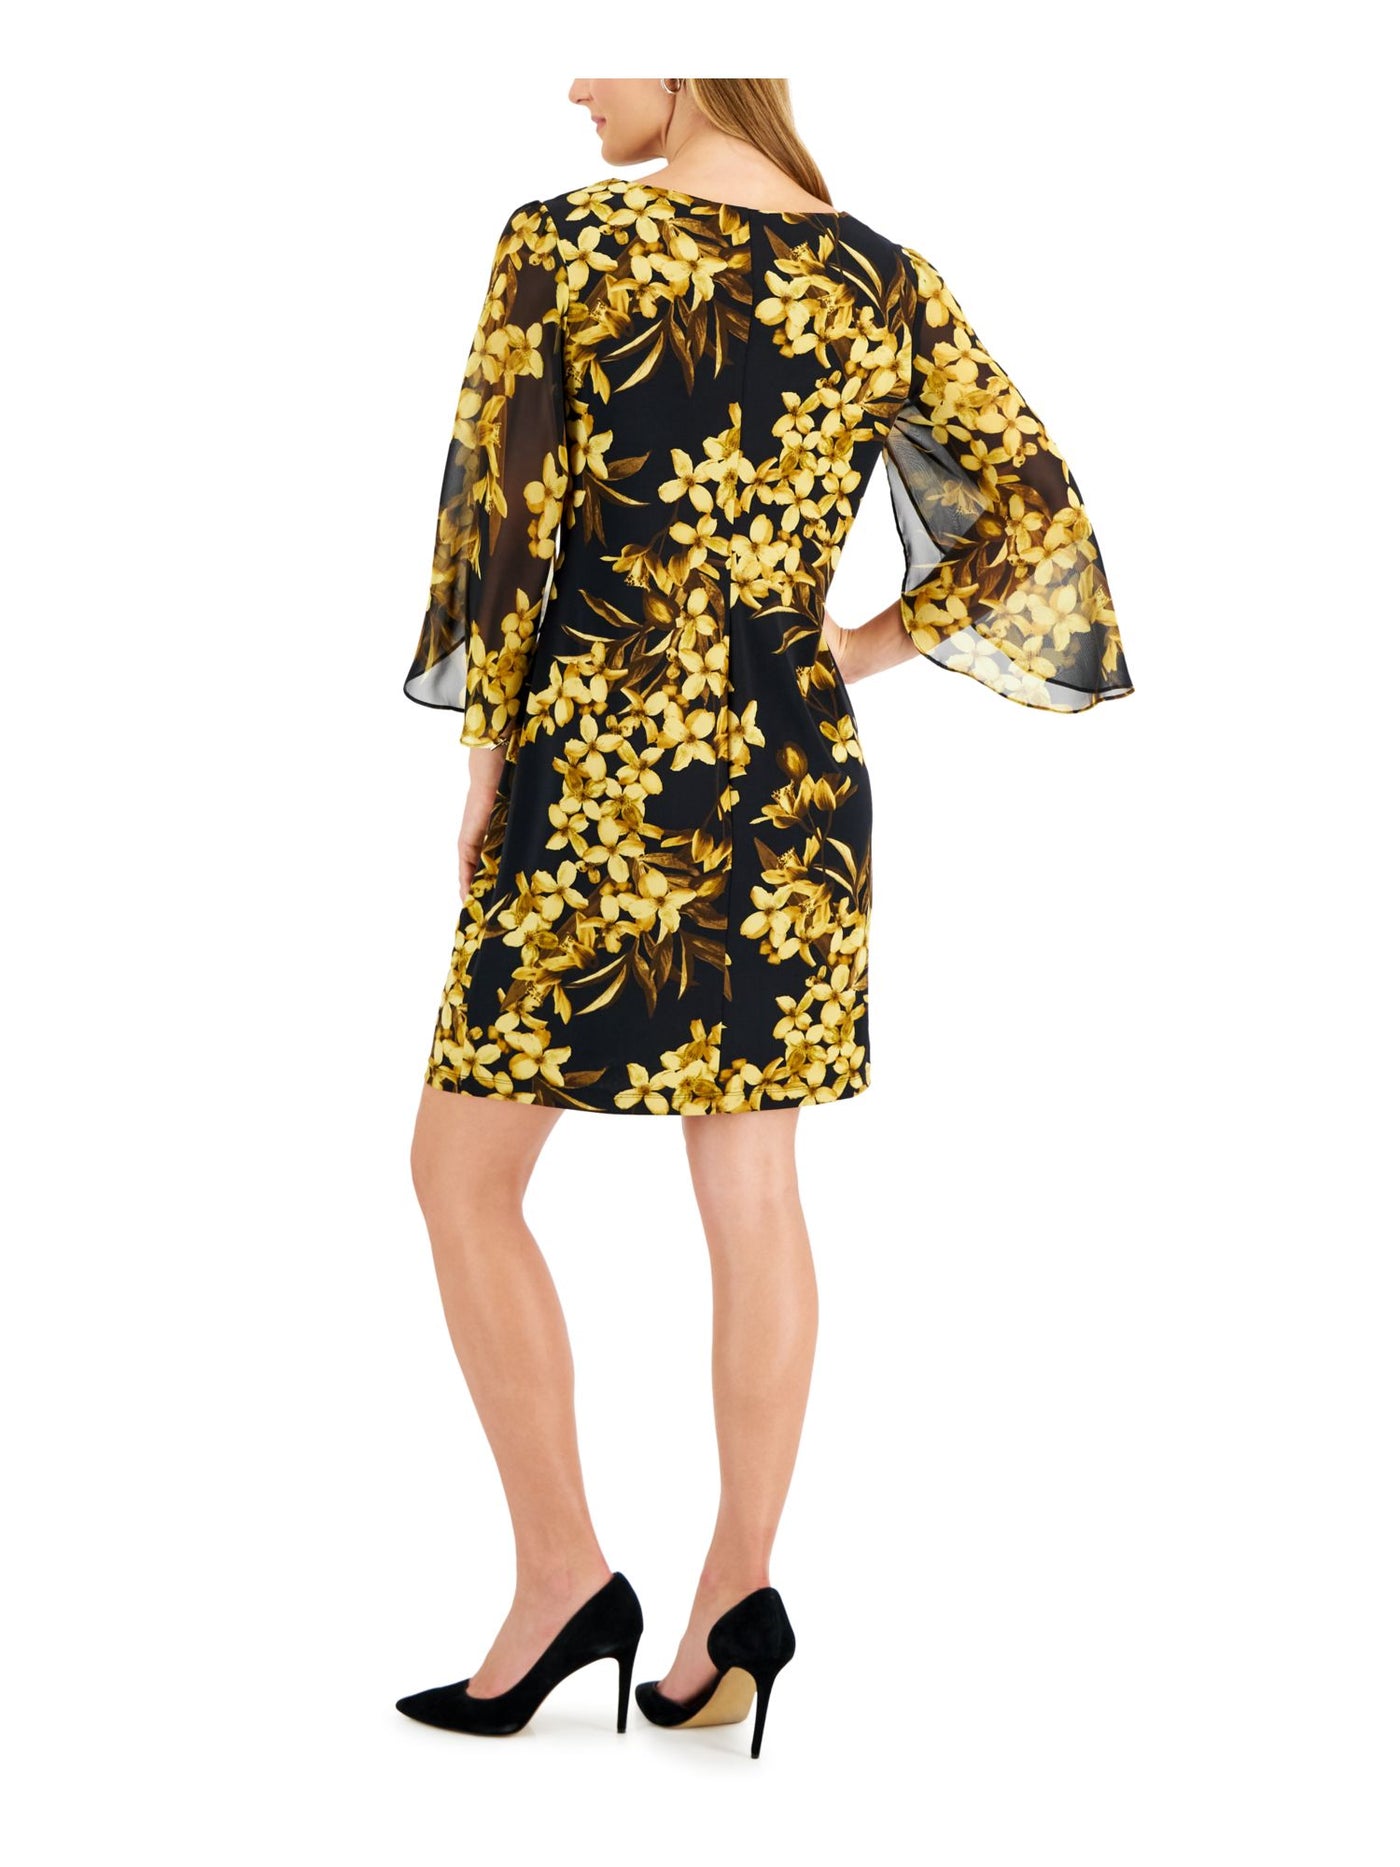 CONNECTED APPAREL Womens Black Unlined Sheer Pullover Darted Floral 3/4 Sleeve Round Neck Above The Knee Sheath Dress 4